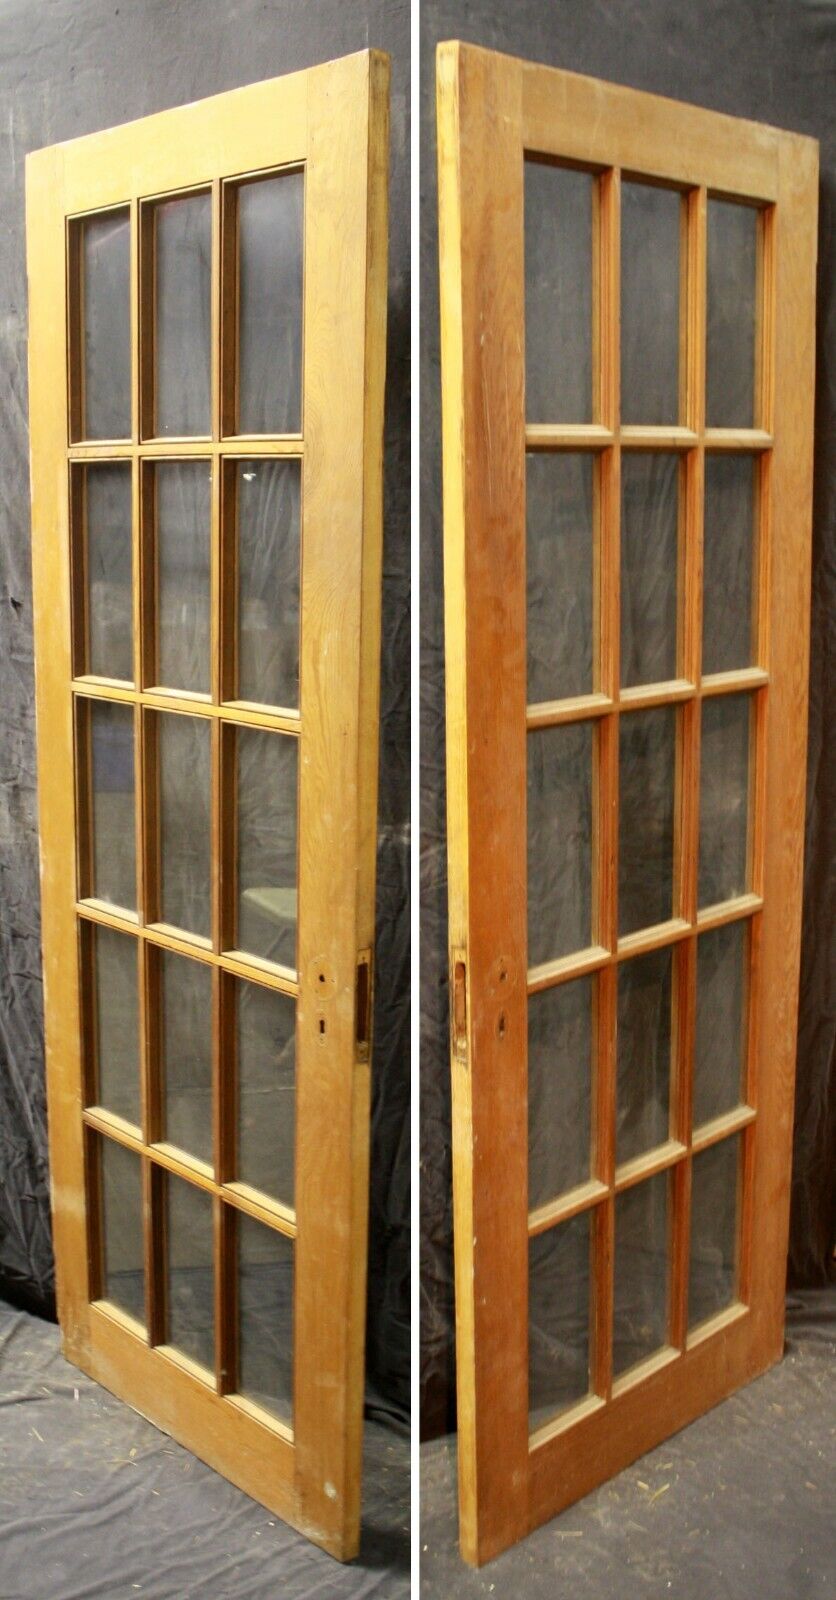 2 available 30x76" Antique Vintage Old Salvaged Reclaimed Wood Wooden Exterior French Door 15 Wavy Glass Lites Panes